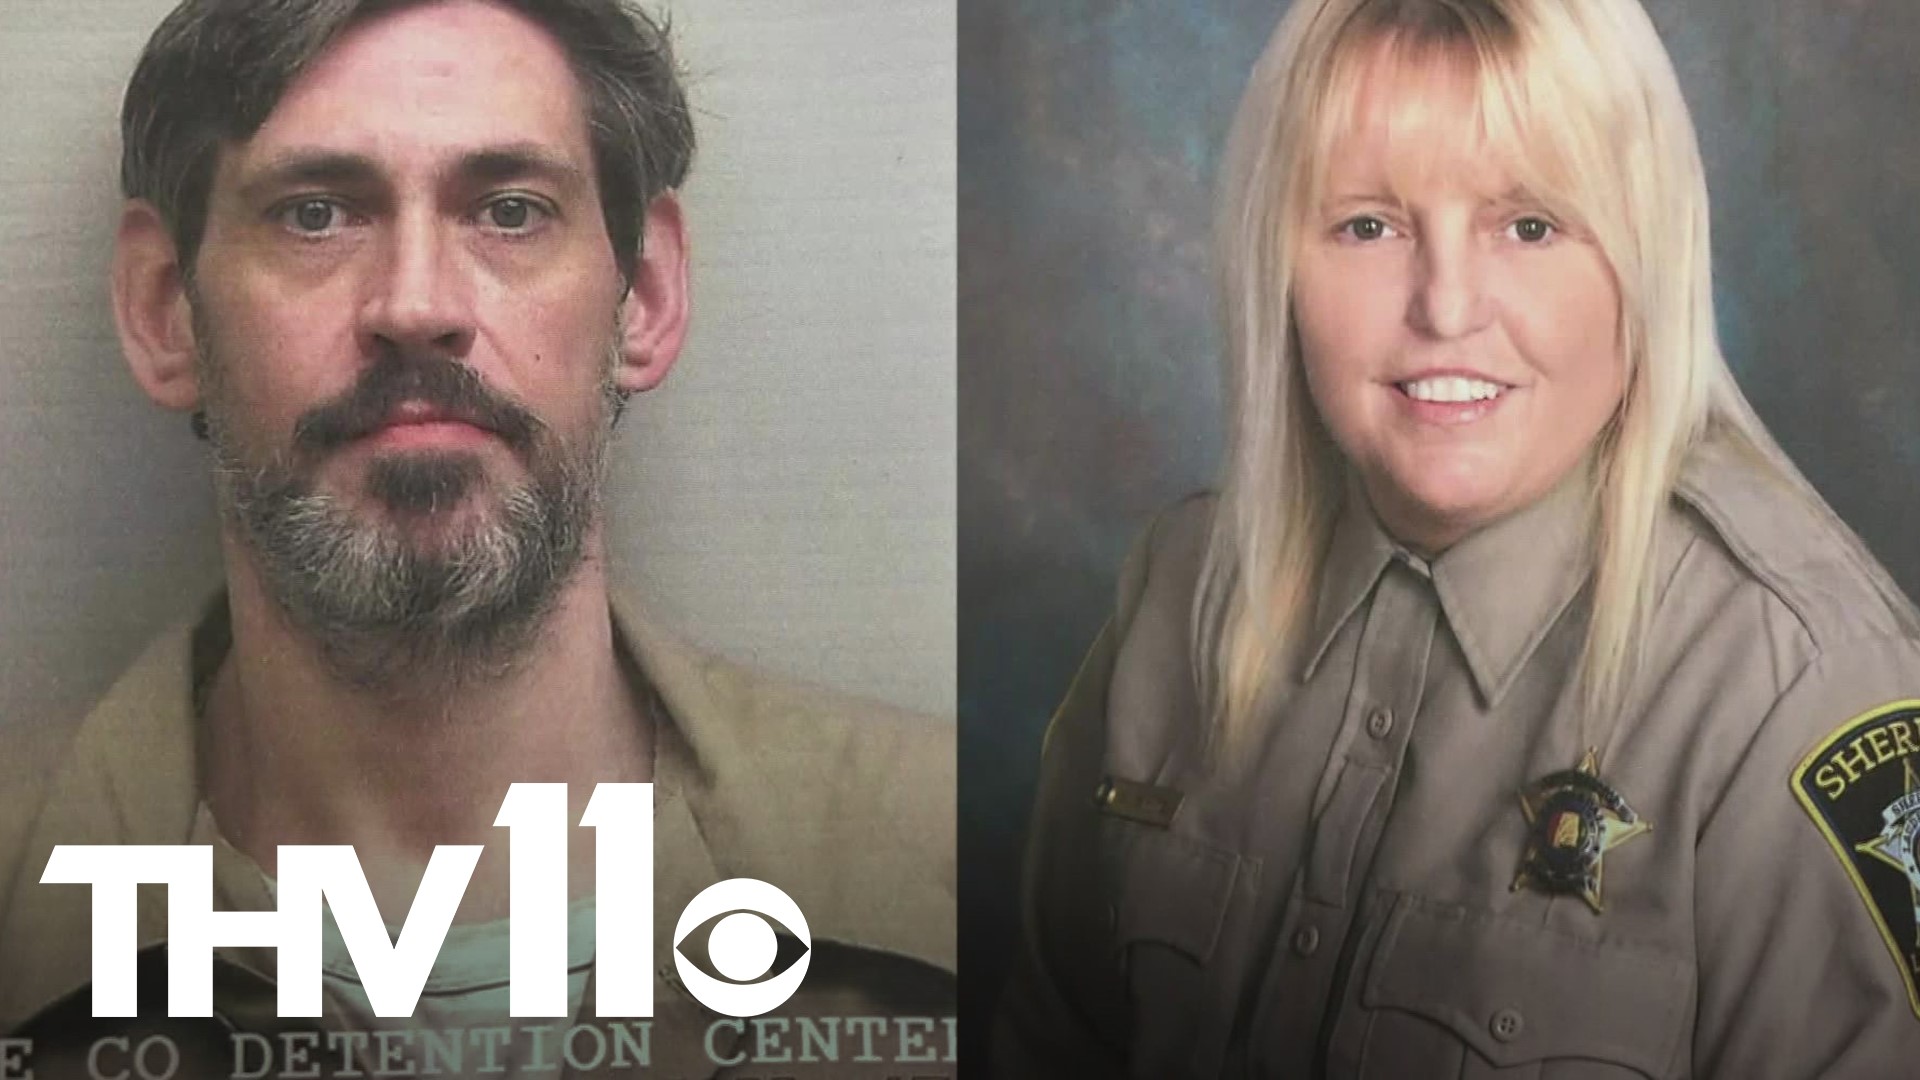 The death of Vicky White only deepened the mystery of why a respected jail official would leave everything to help free an inmate with a violent history.